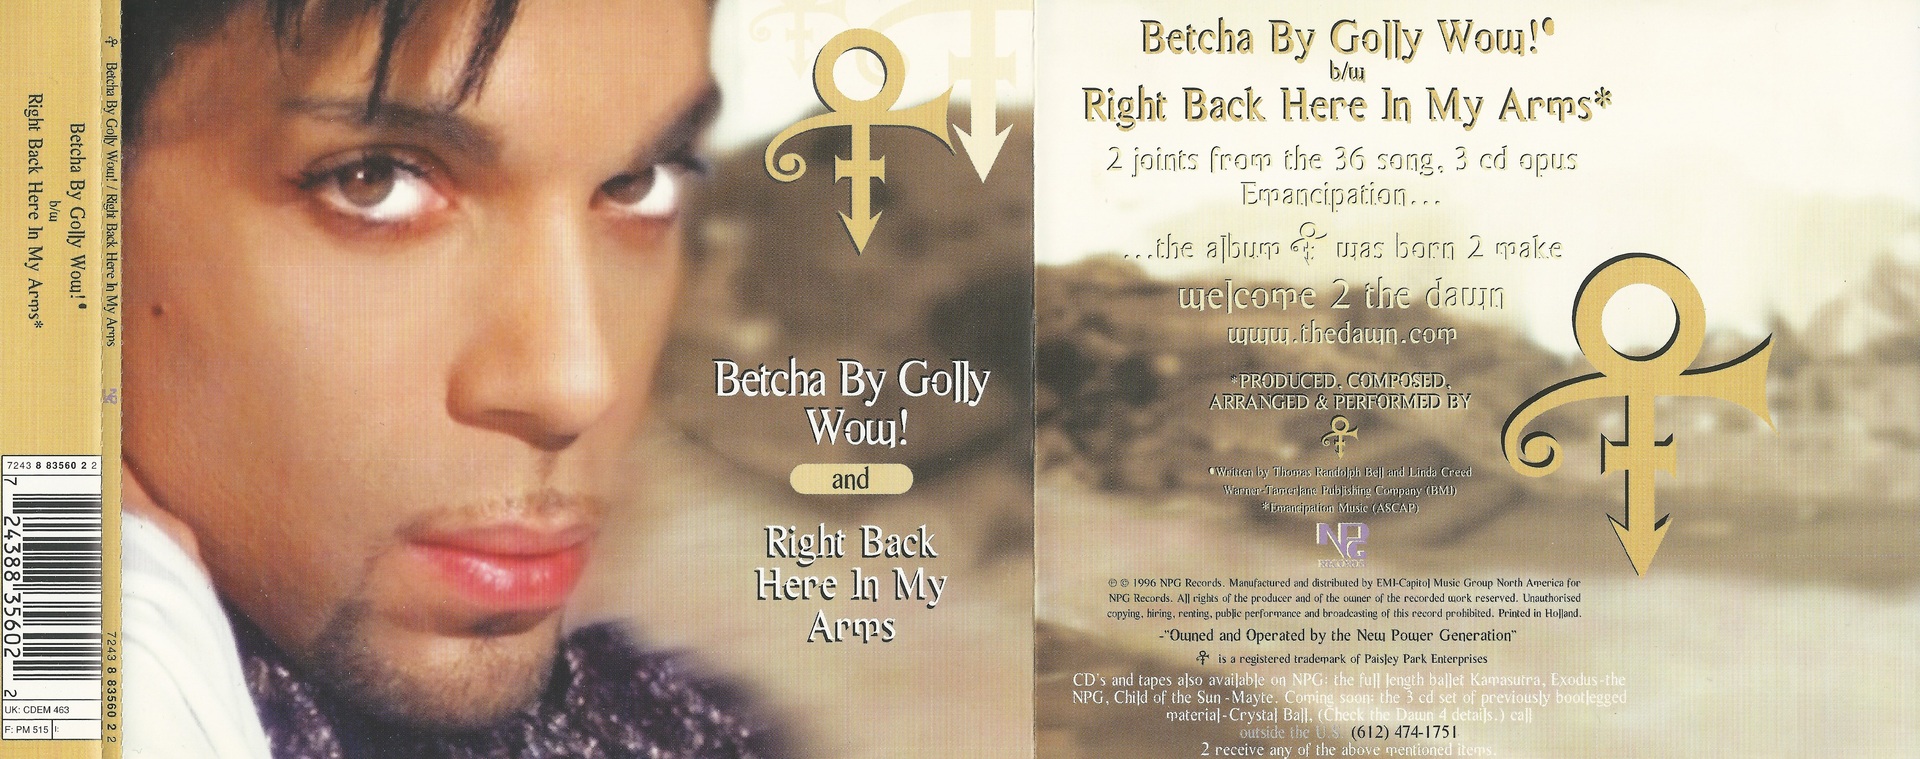 betcha by golly wow by prince